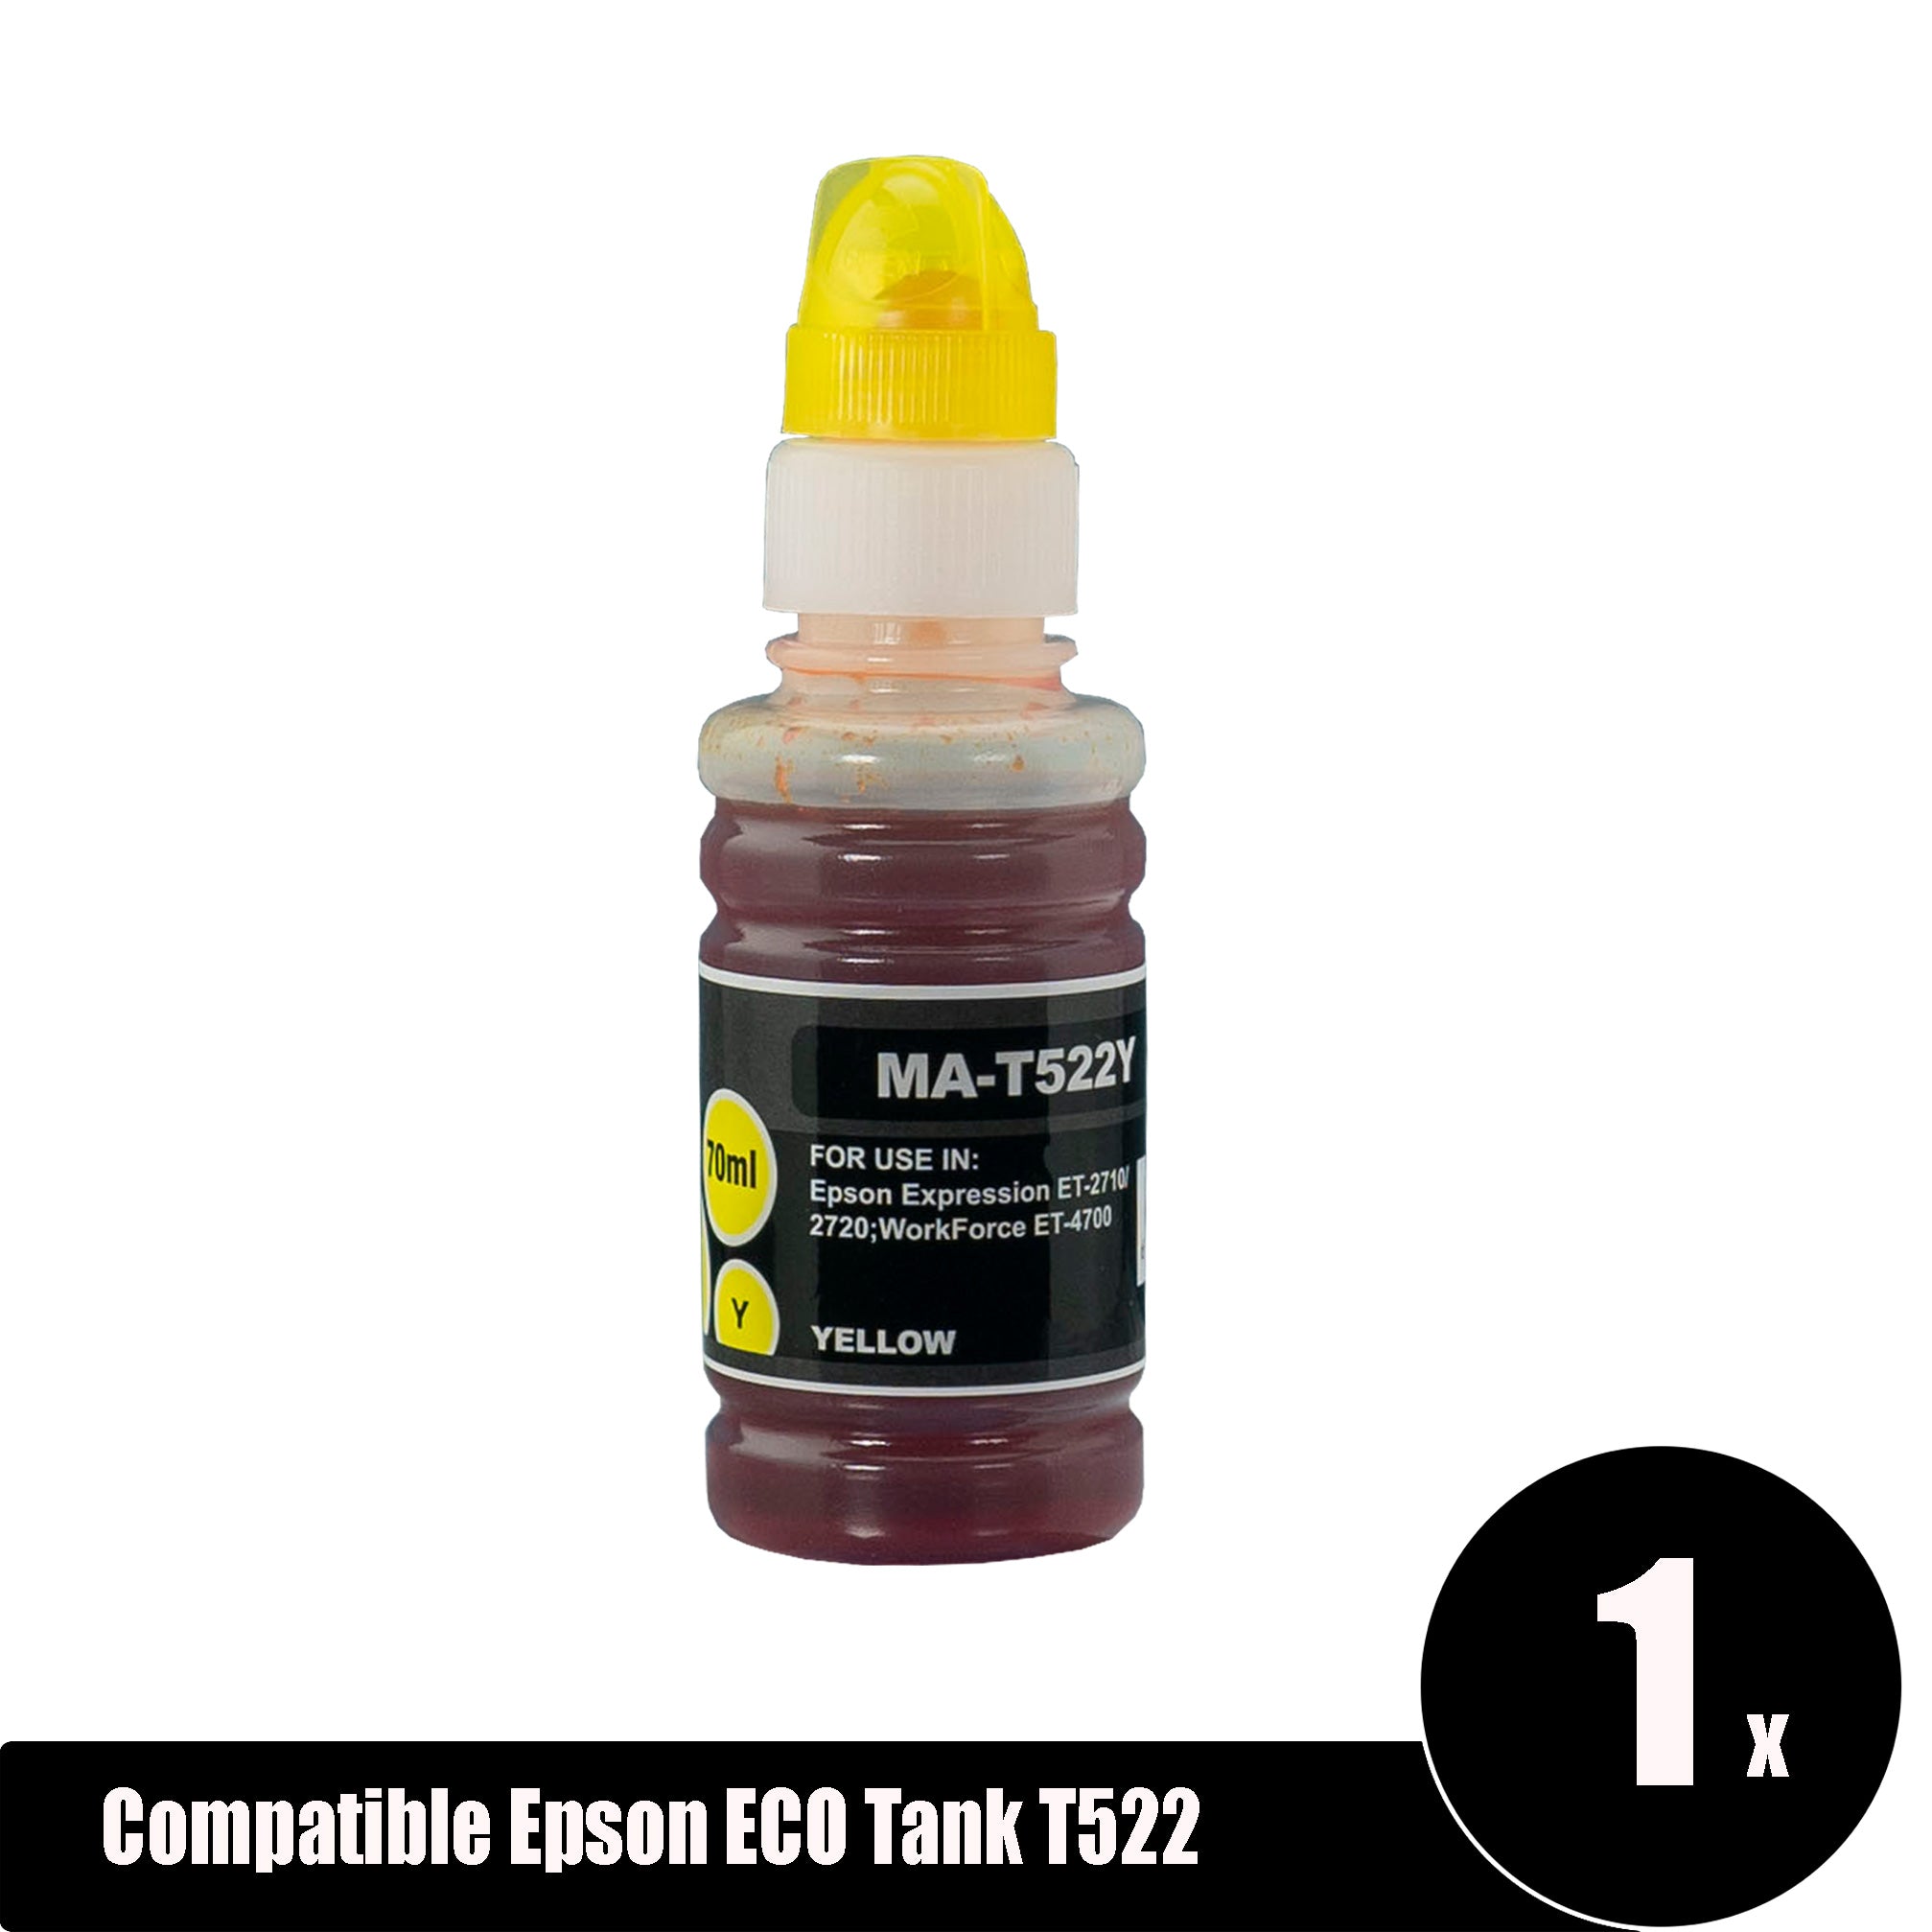 Compatible Epson ECO Tank T522 Yellow Ink